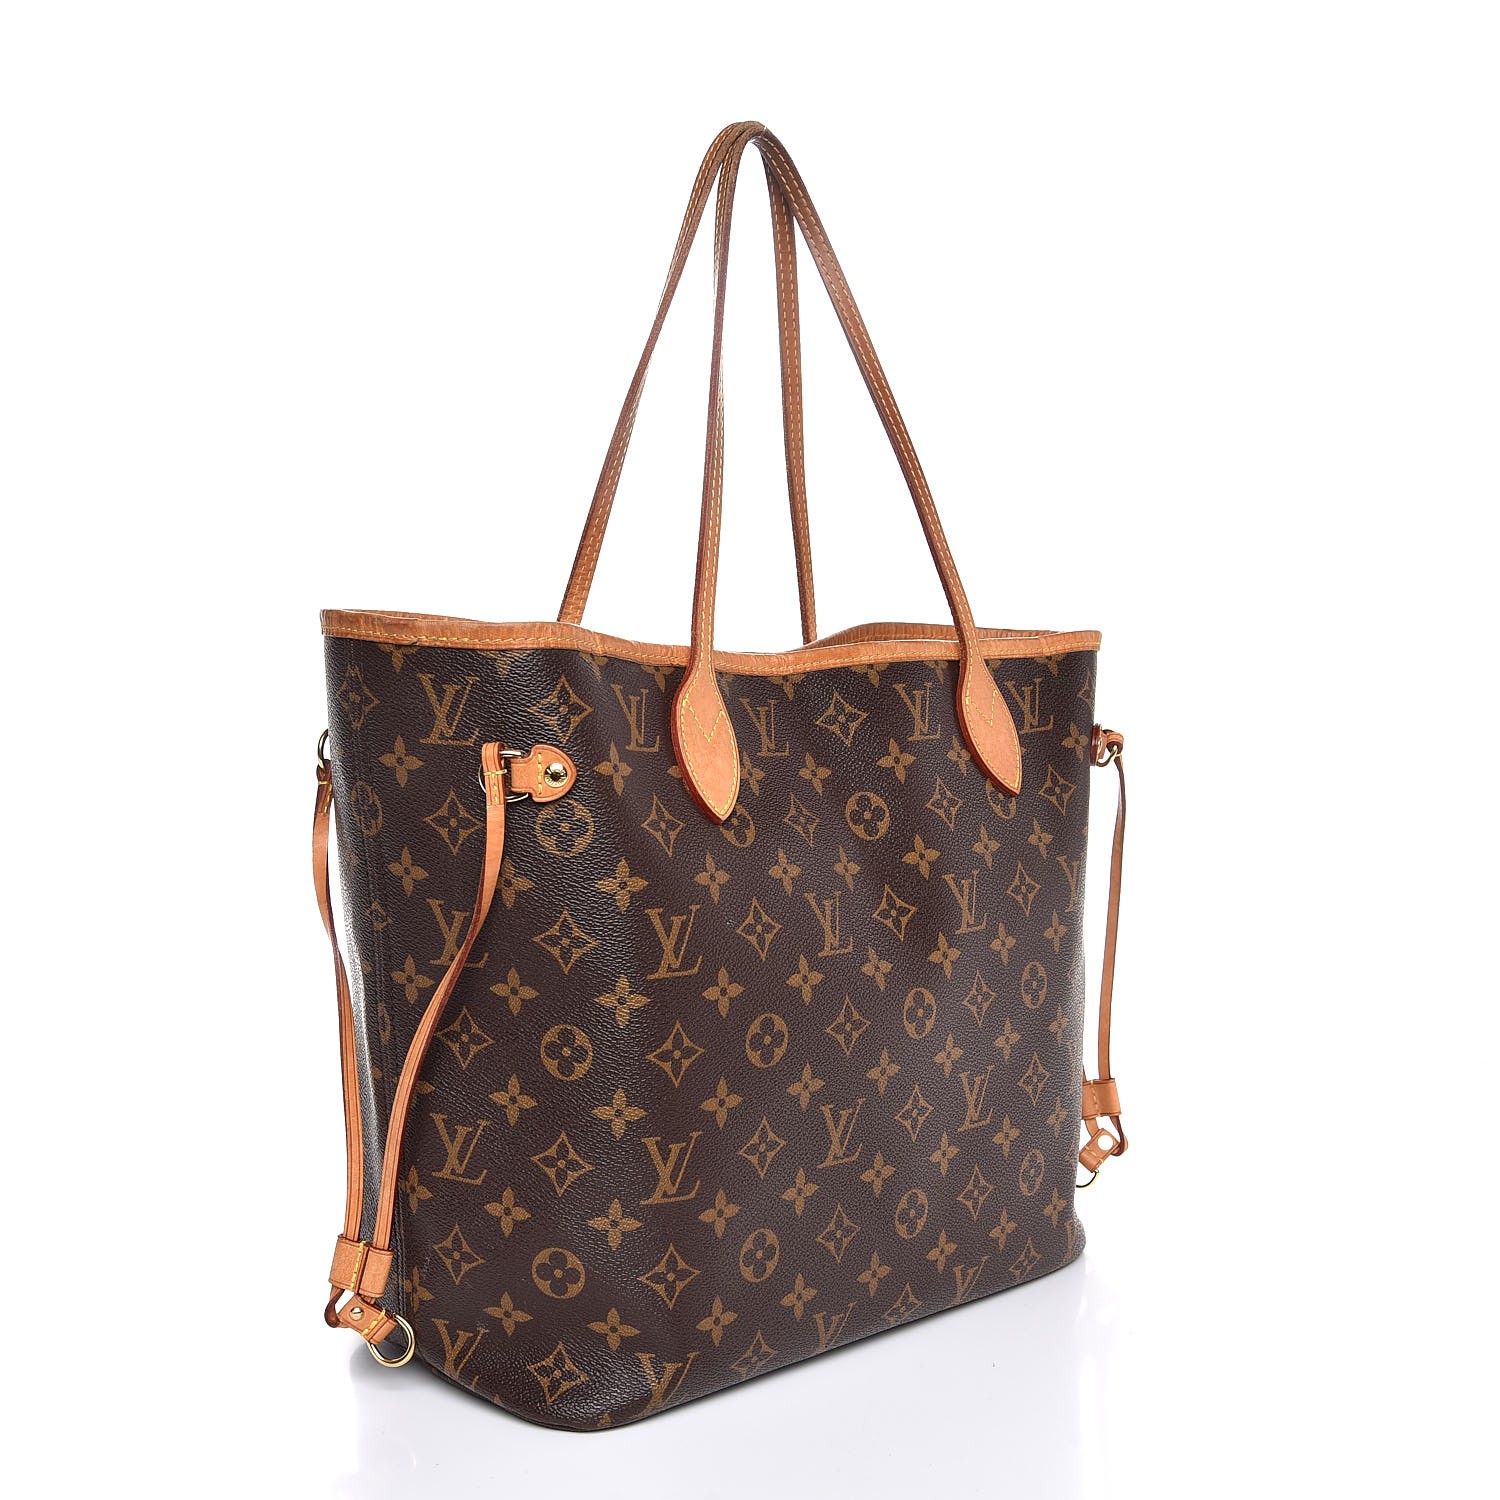 LV NEVERFULL GM vs MARC JACOBS LARGE TOTE BAG, SIDE BY SIDE